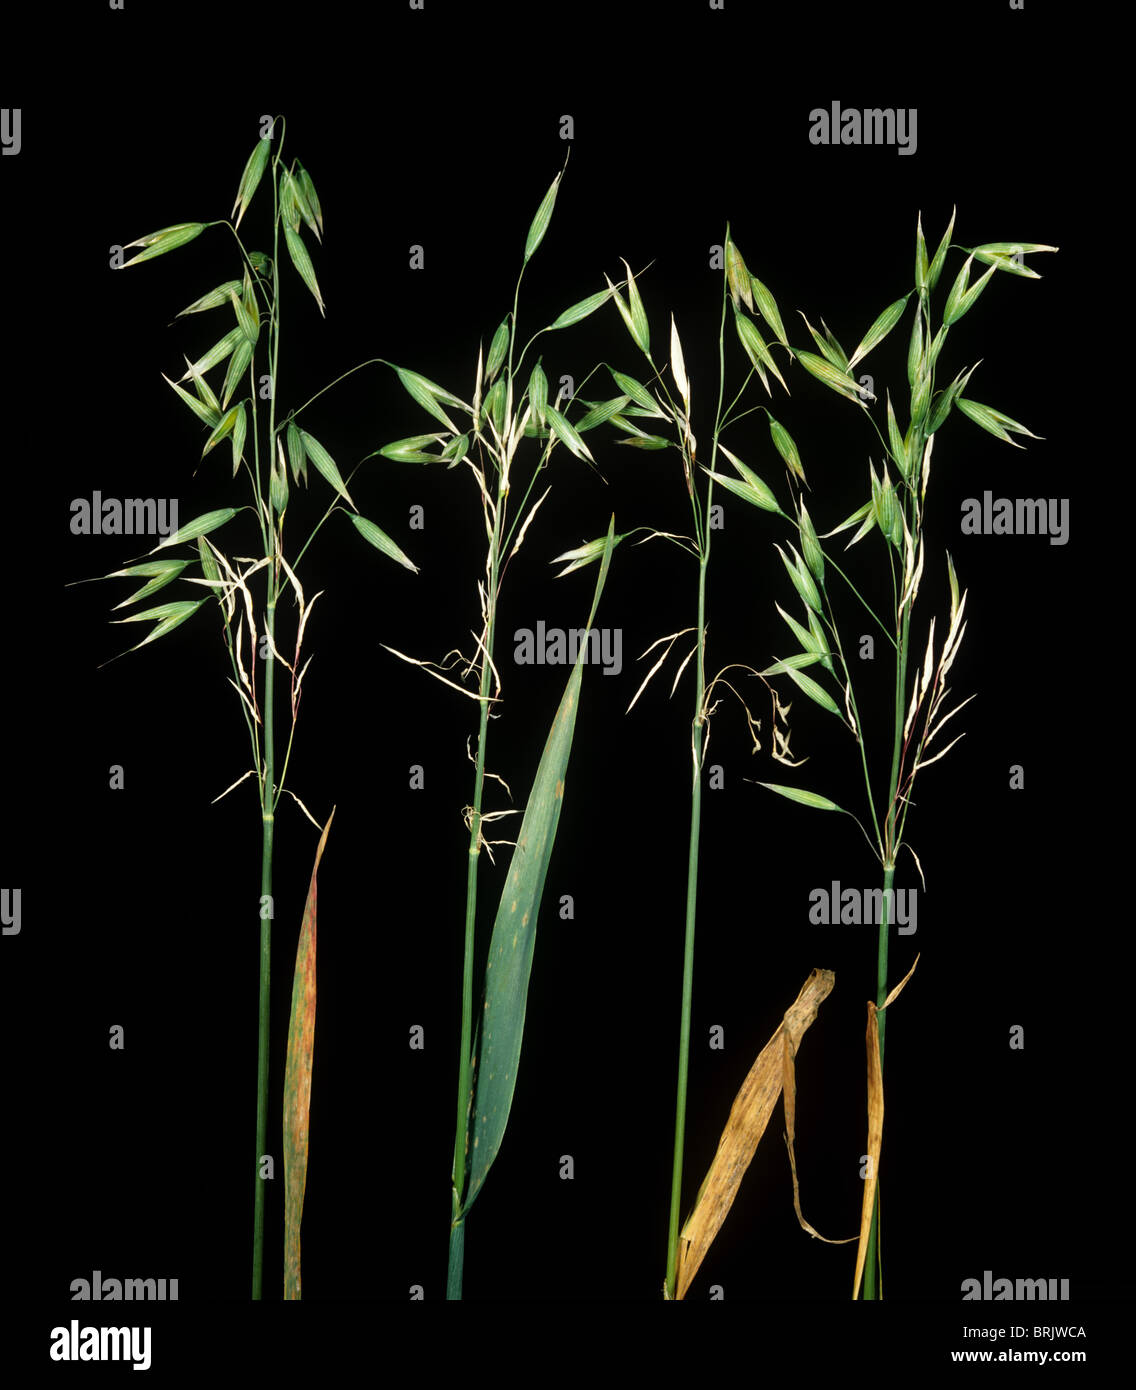 Aborted grains or oats ears diseased or damaged plants Stock Photo